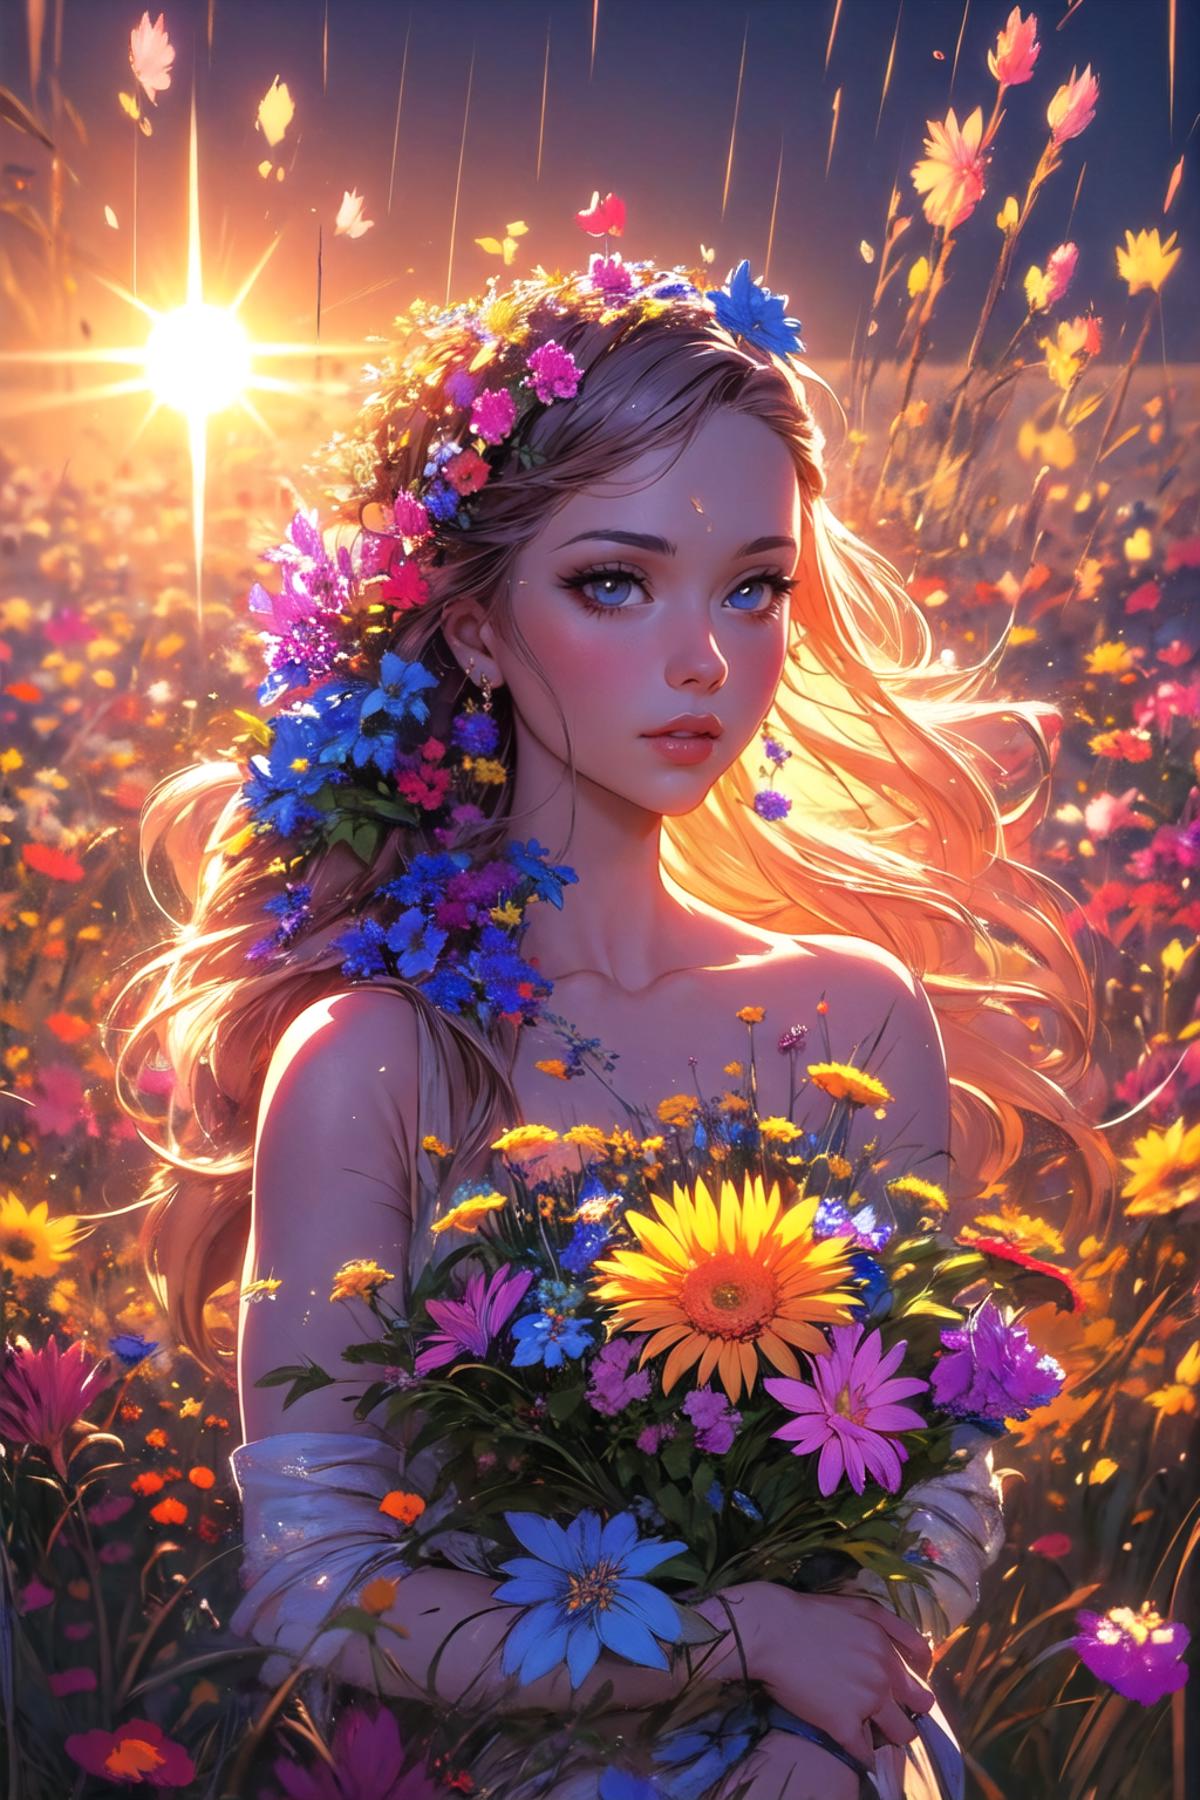 A beautiful illustration of a woman in a field of flowers.